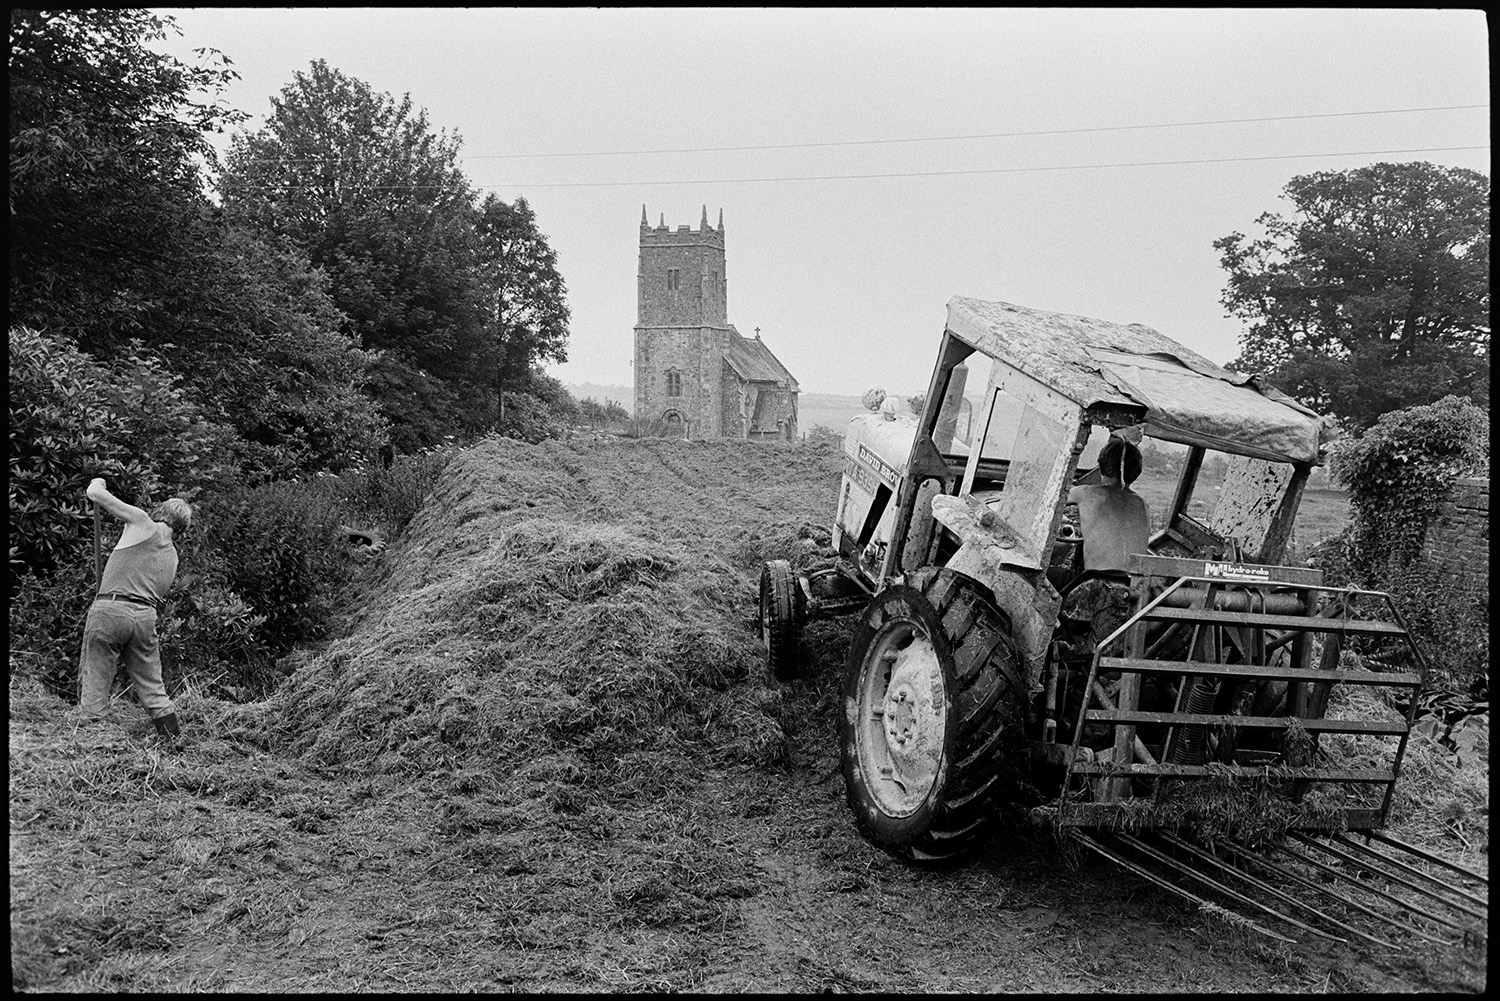 Farmers building silage clamp in front of redundant church.
[Two men with a tractor preparing a silage clamp near the redundant church at Ashbury, Northlew. One man is using a fork to dig a base for the clamp.]